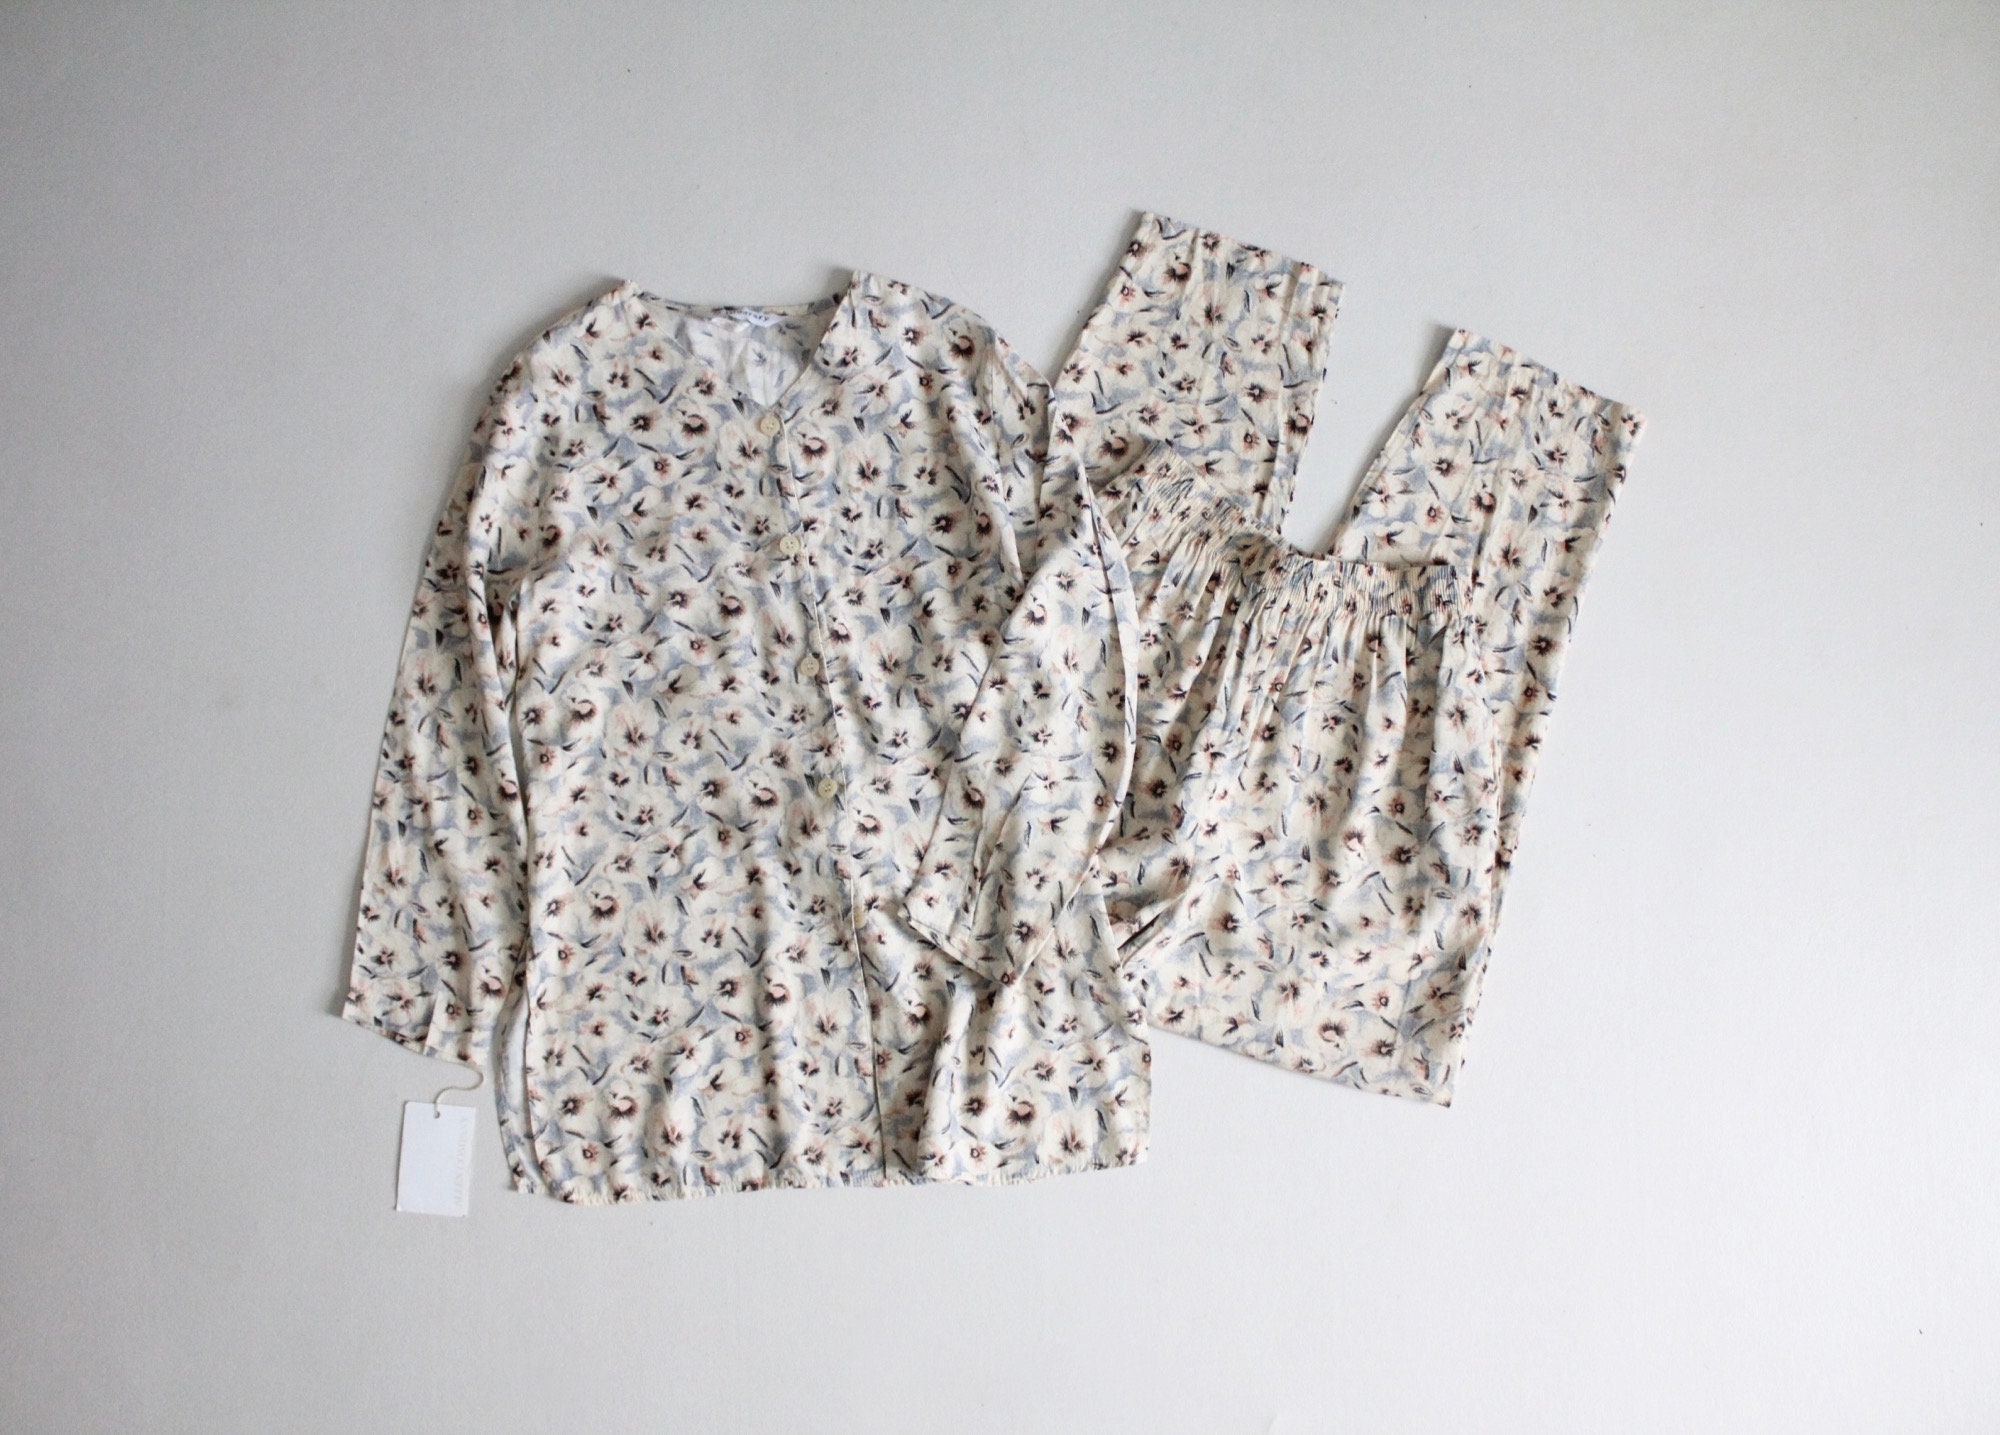 Two-piece Outfit Floral Blouse & Pants Matching Top and Trousers